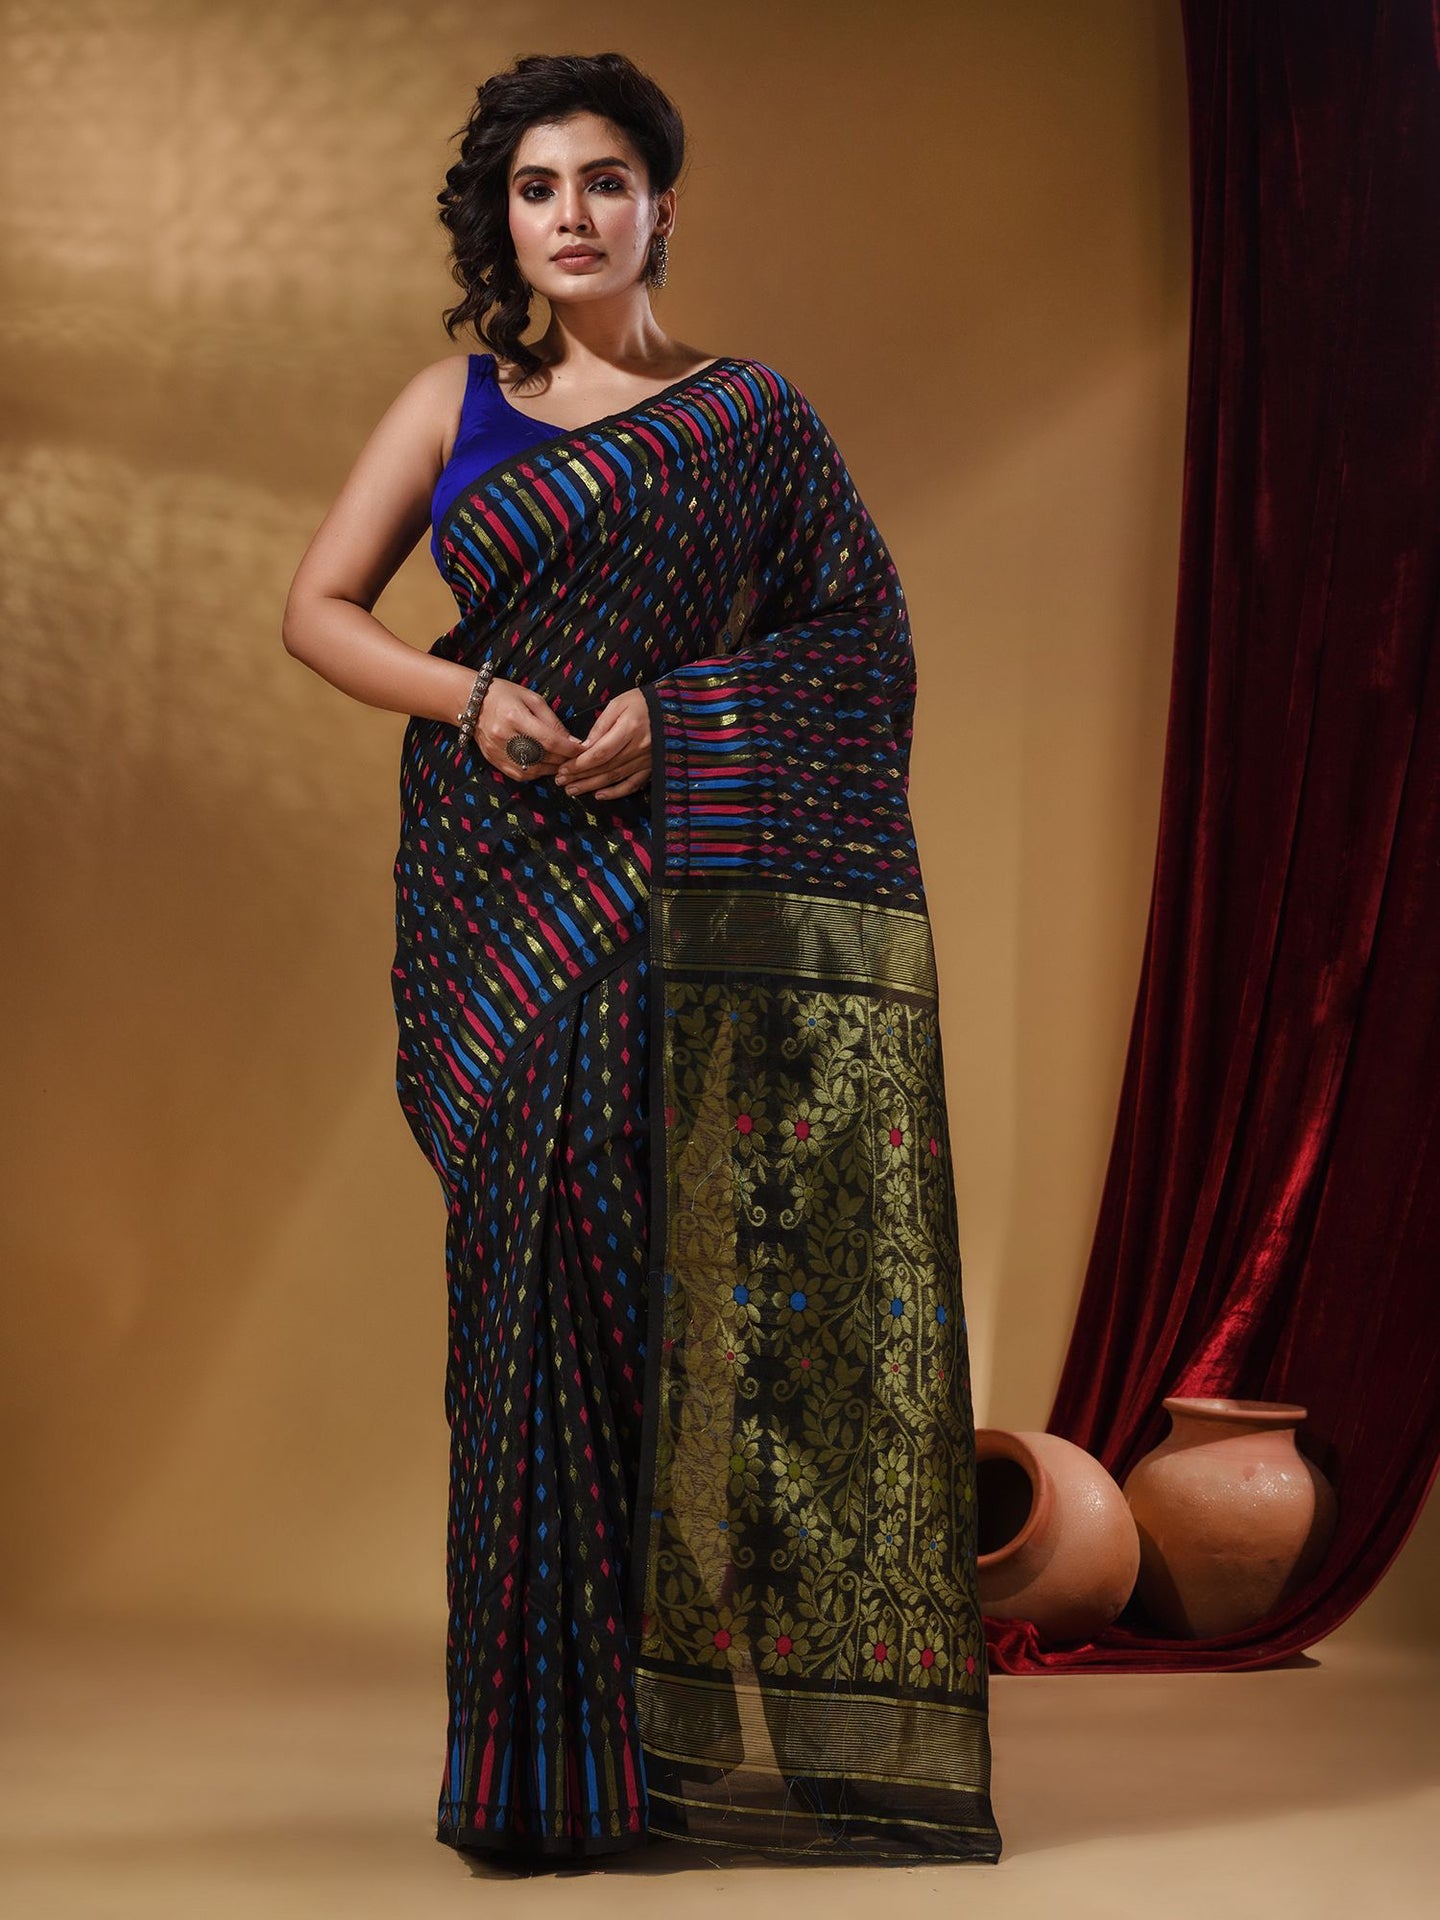 Black Cotton Handwoven Jamdani Saree With Woven Buttas And Floral Designs